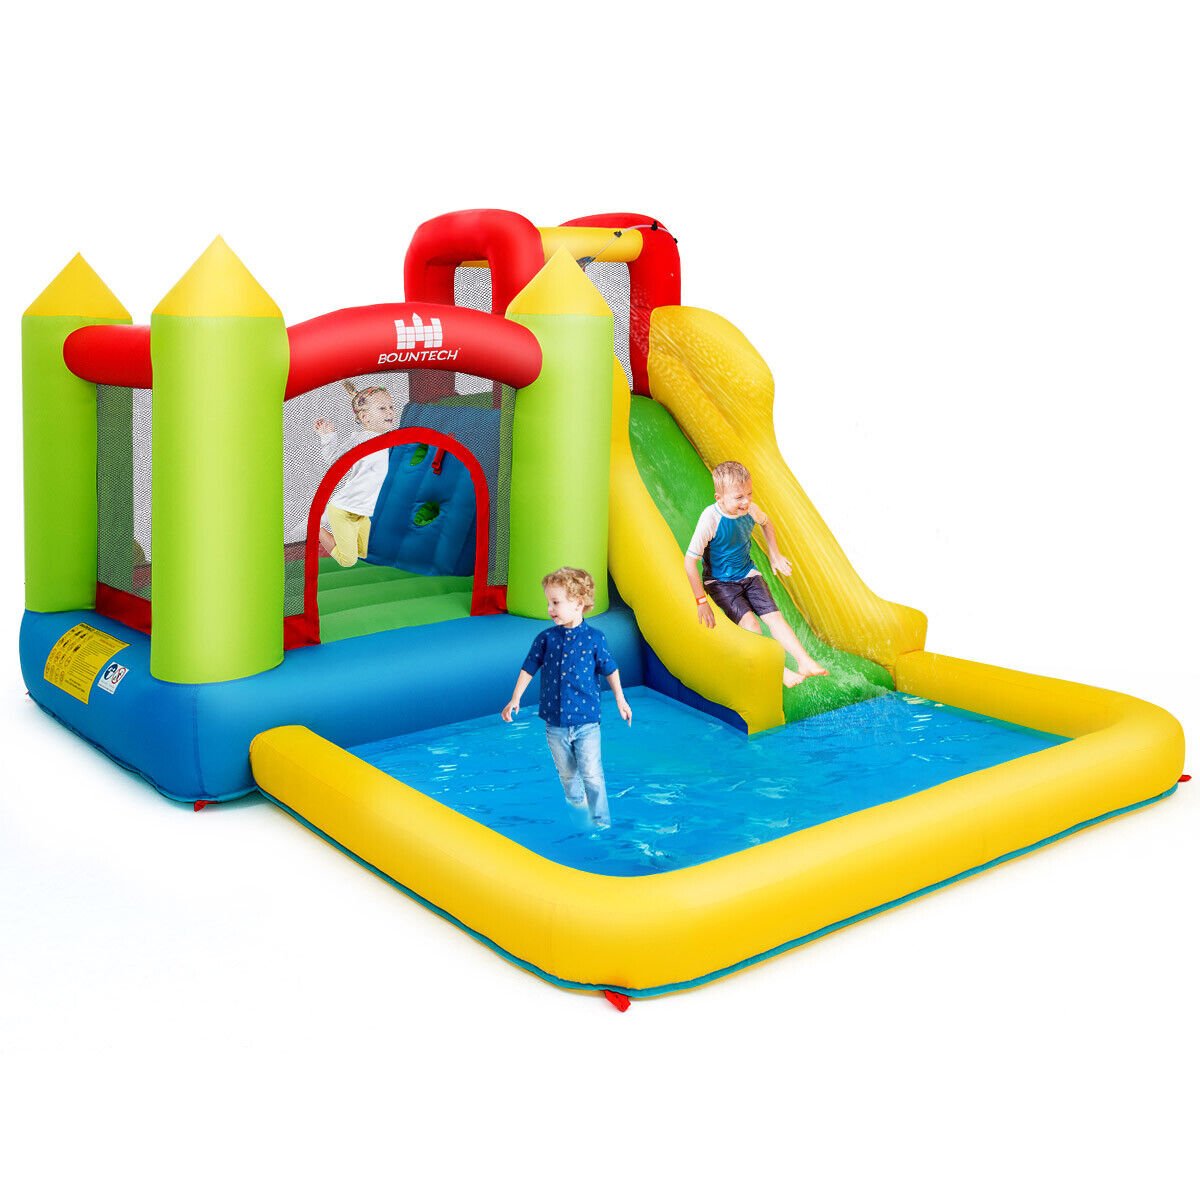 Kids Water Slide Inflatable Castle - Aquatic Adventure (Blower Included)